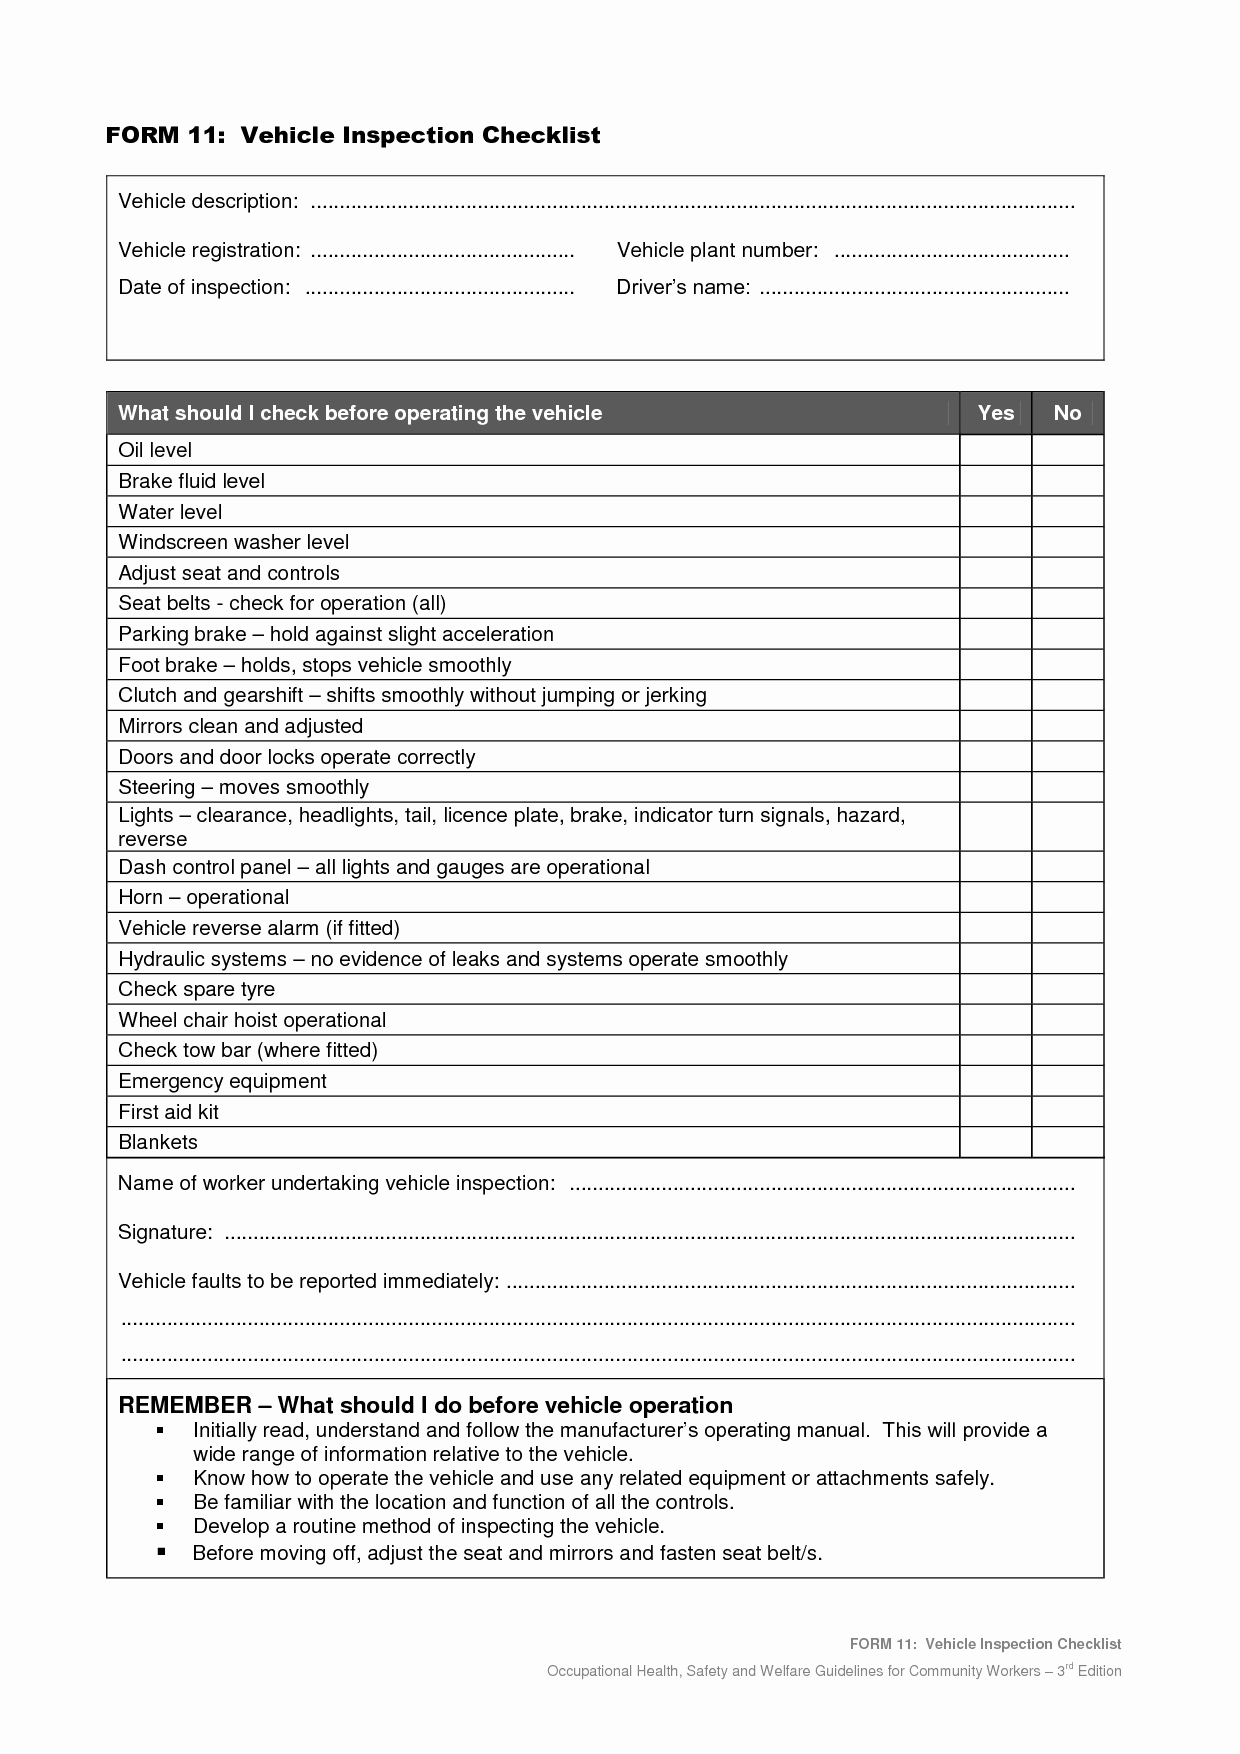 Auto Repair Checklist Template Awesome Vehicle Safety Inspection Checklist form